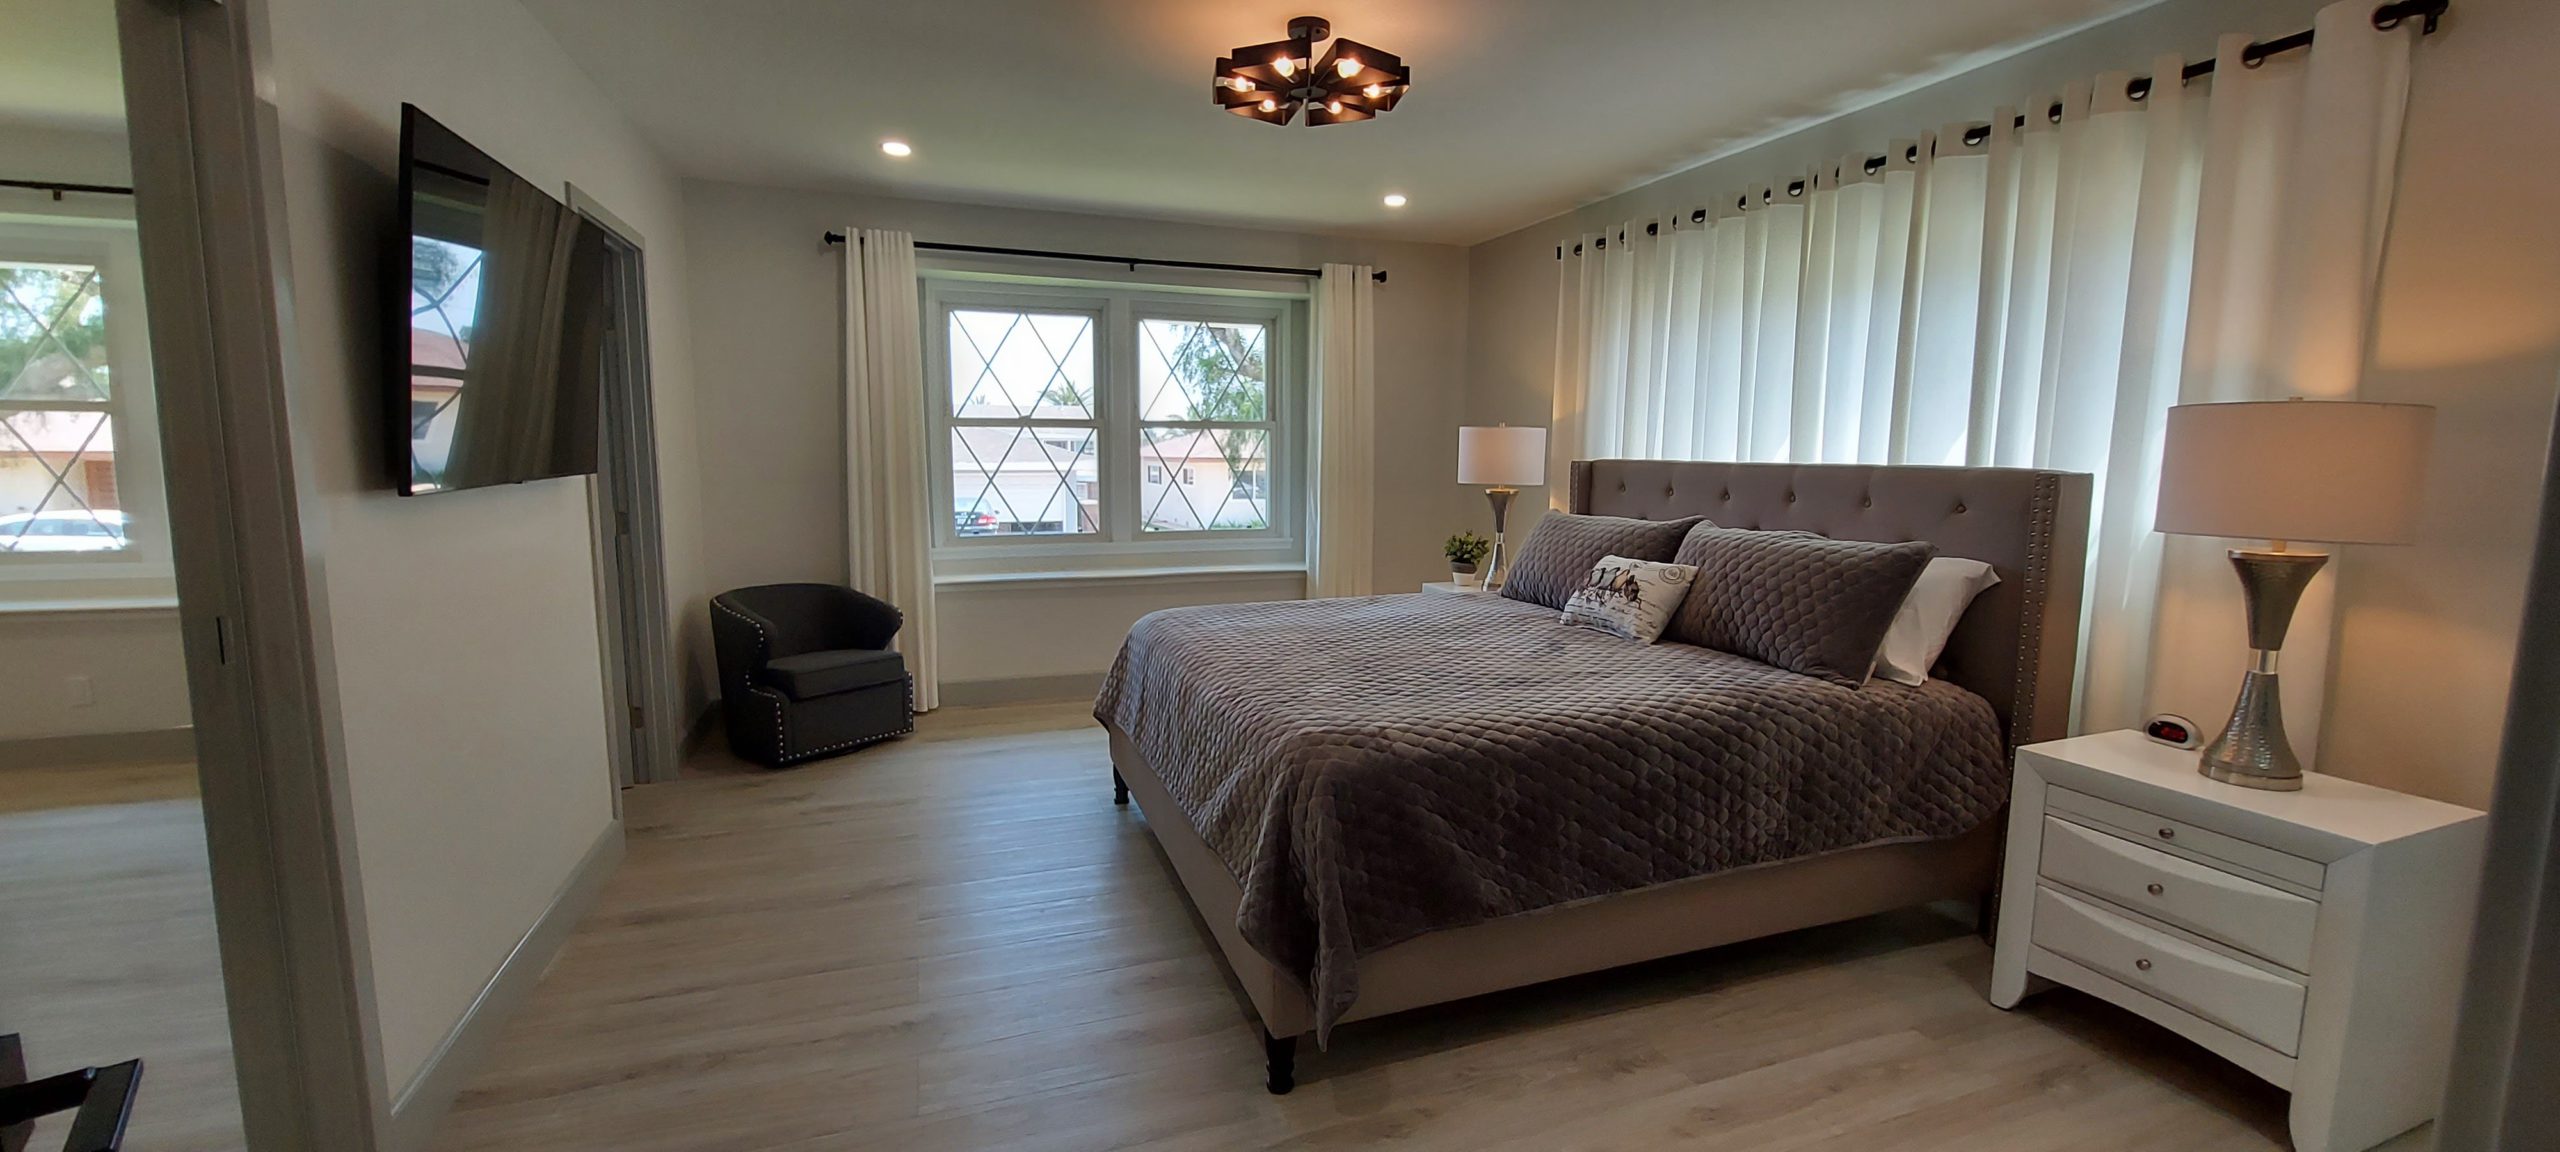 The Oasis in Camarillo - Master Bedroom